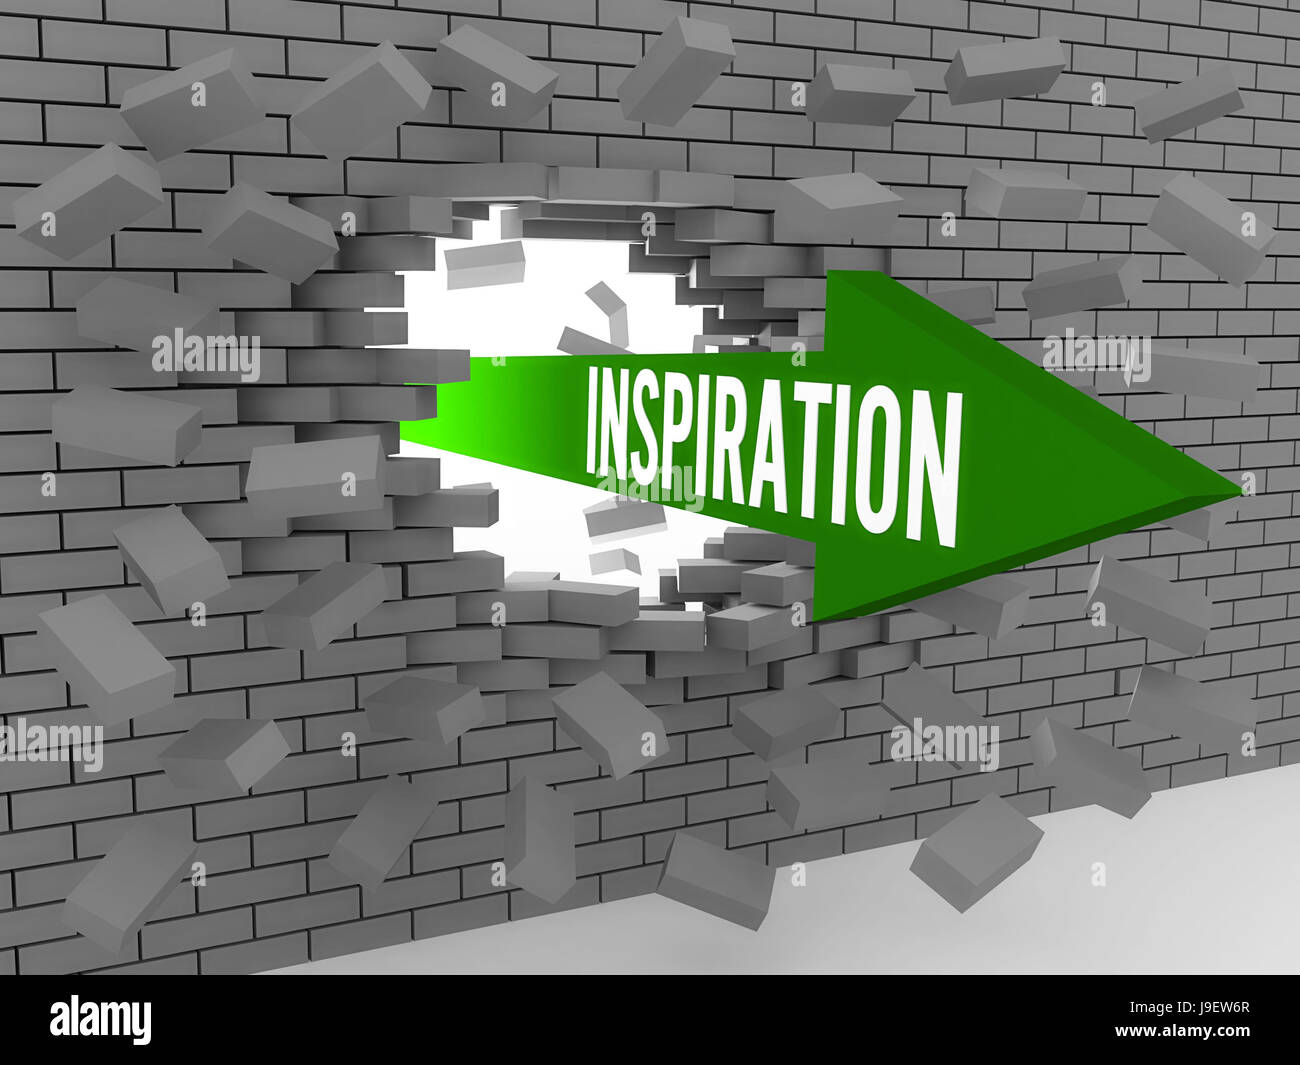 Arrow with word Inspiration breaking brick wall. Concept 3D illustration. Stock Photo